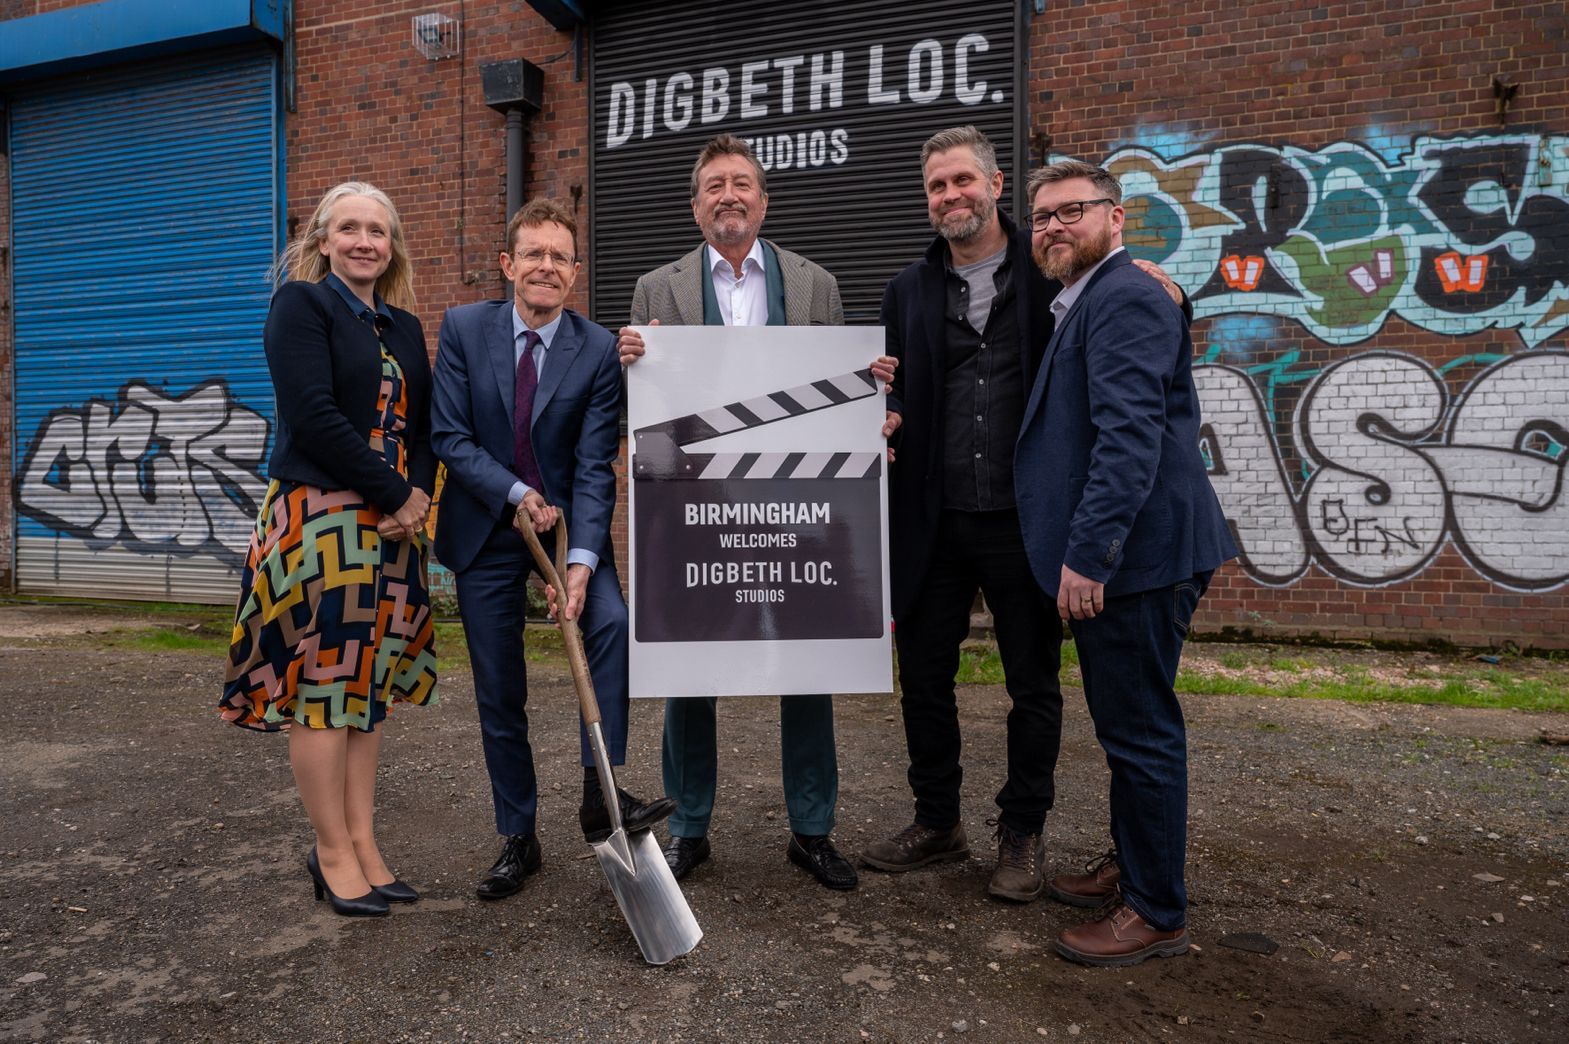 Steven Knight and team celebrating the announcement of Digbeth Loc Studios